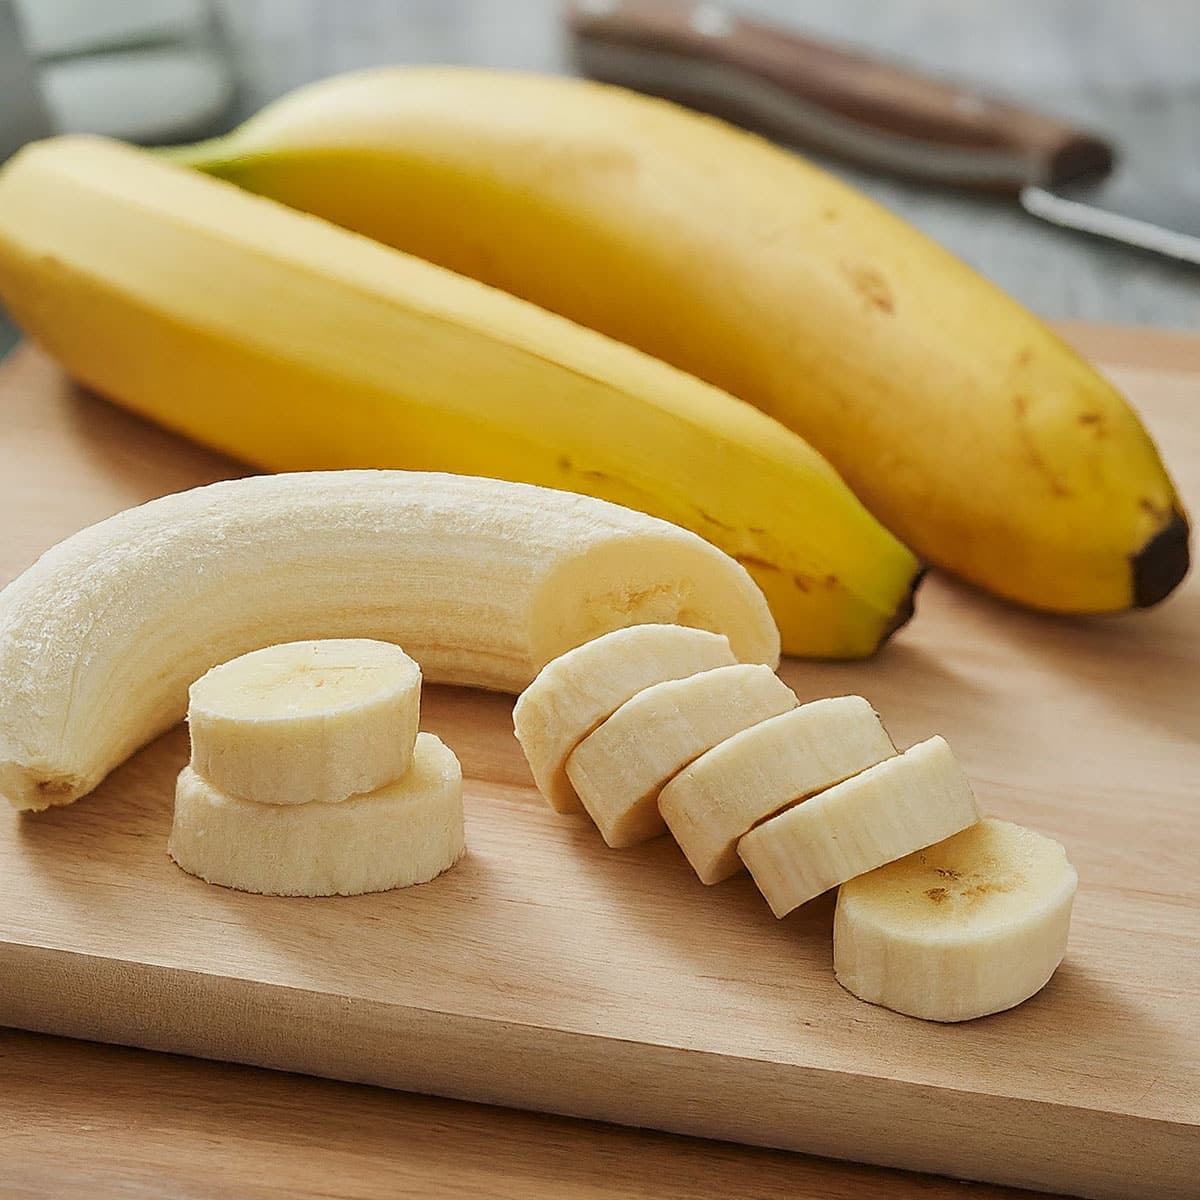 A peeled banana sliced into pieces on a wooden cutting board, with a whole banana in the background.